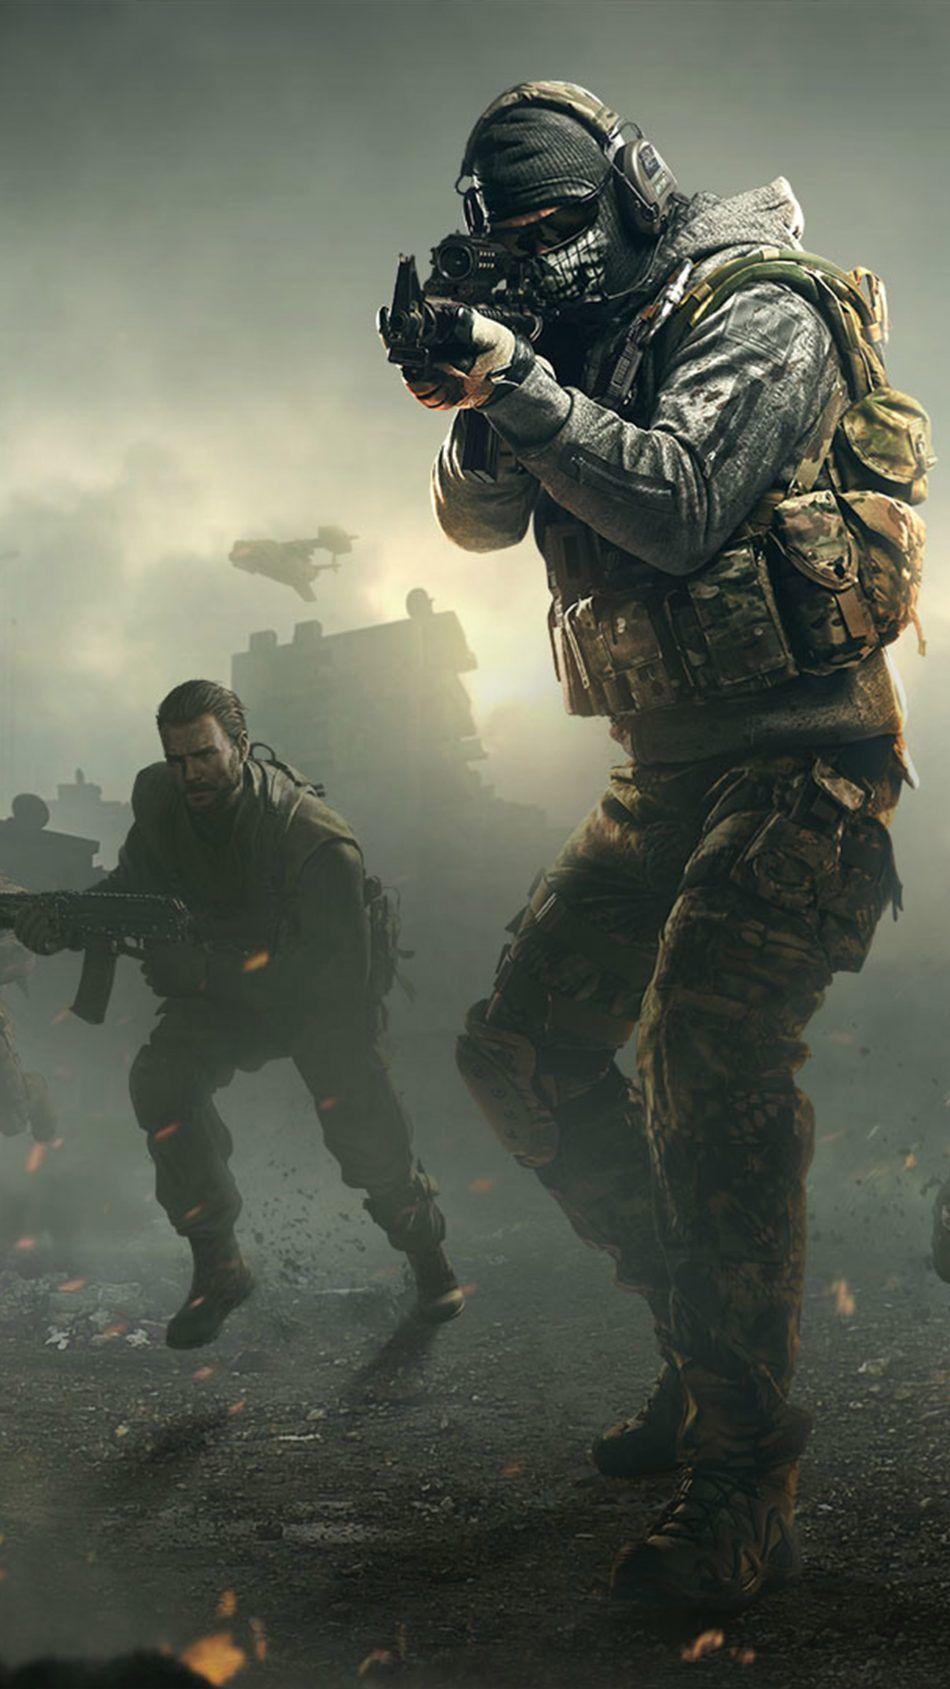 Call of Duty Mobile 4K Ultra HD Mobile Wallpaper. Call of duty ghosts, Call of duty black, Call of duty